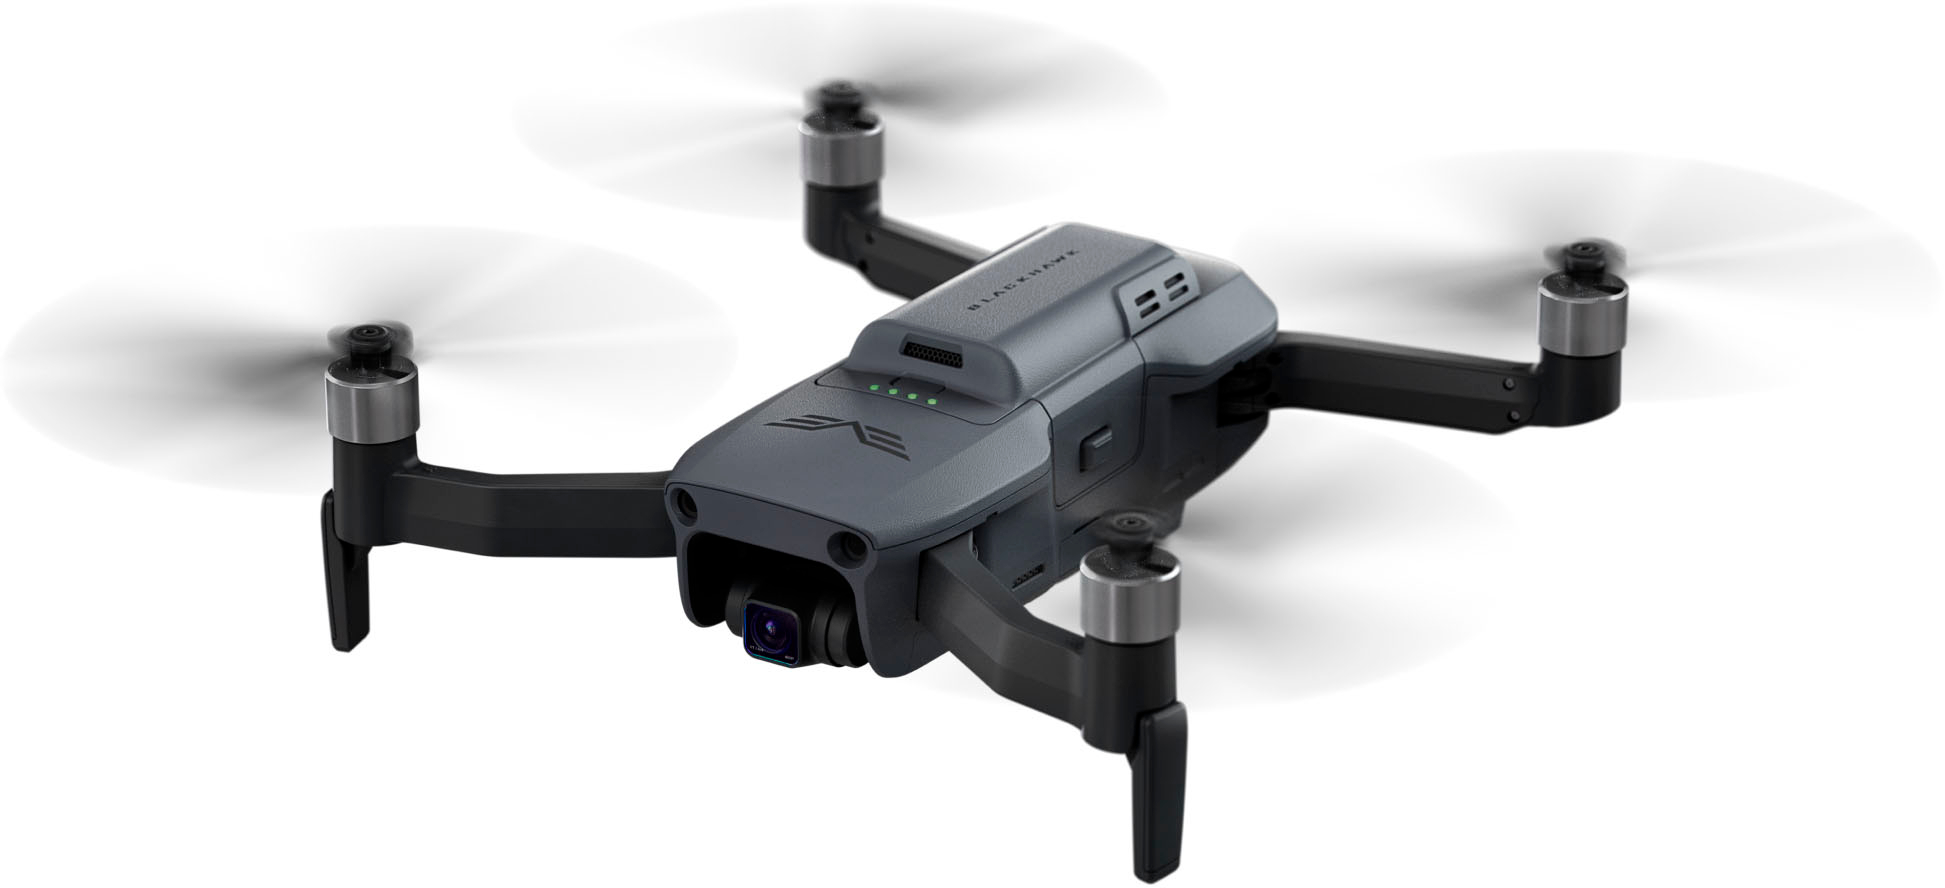 Left View: EXO Drones - Blackhawk 3 Pro Drone and Remote Control (Android and iOS compatible) - Black